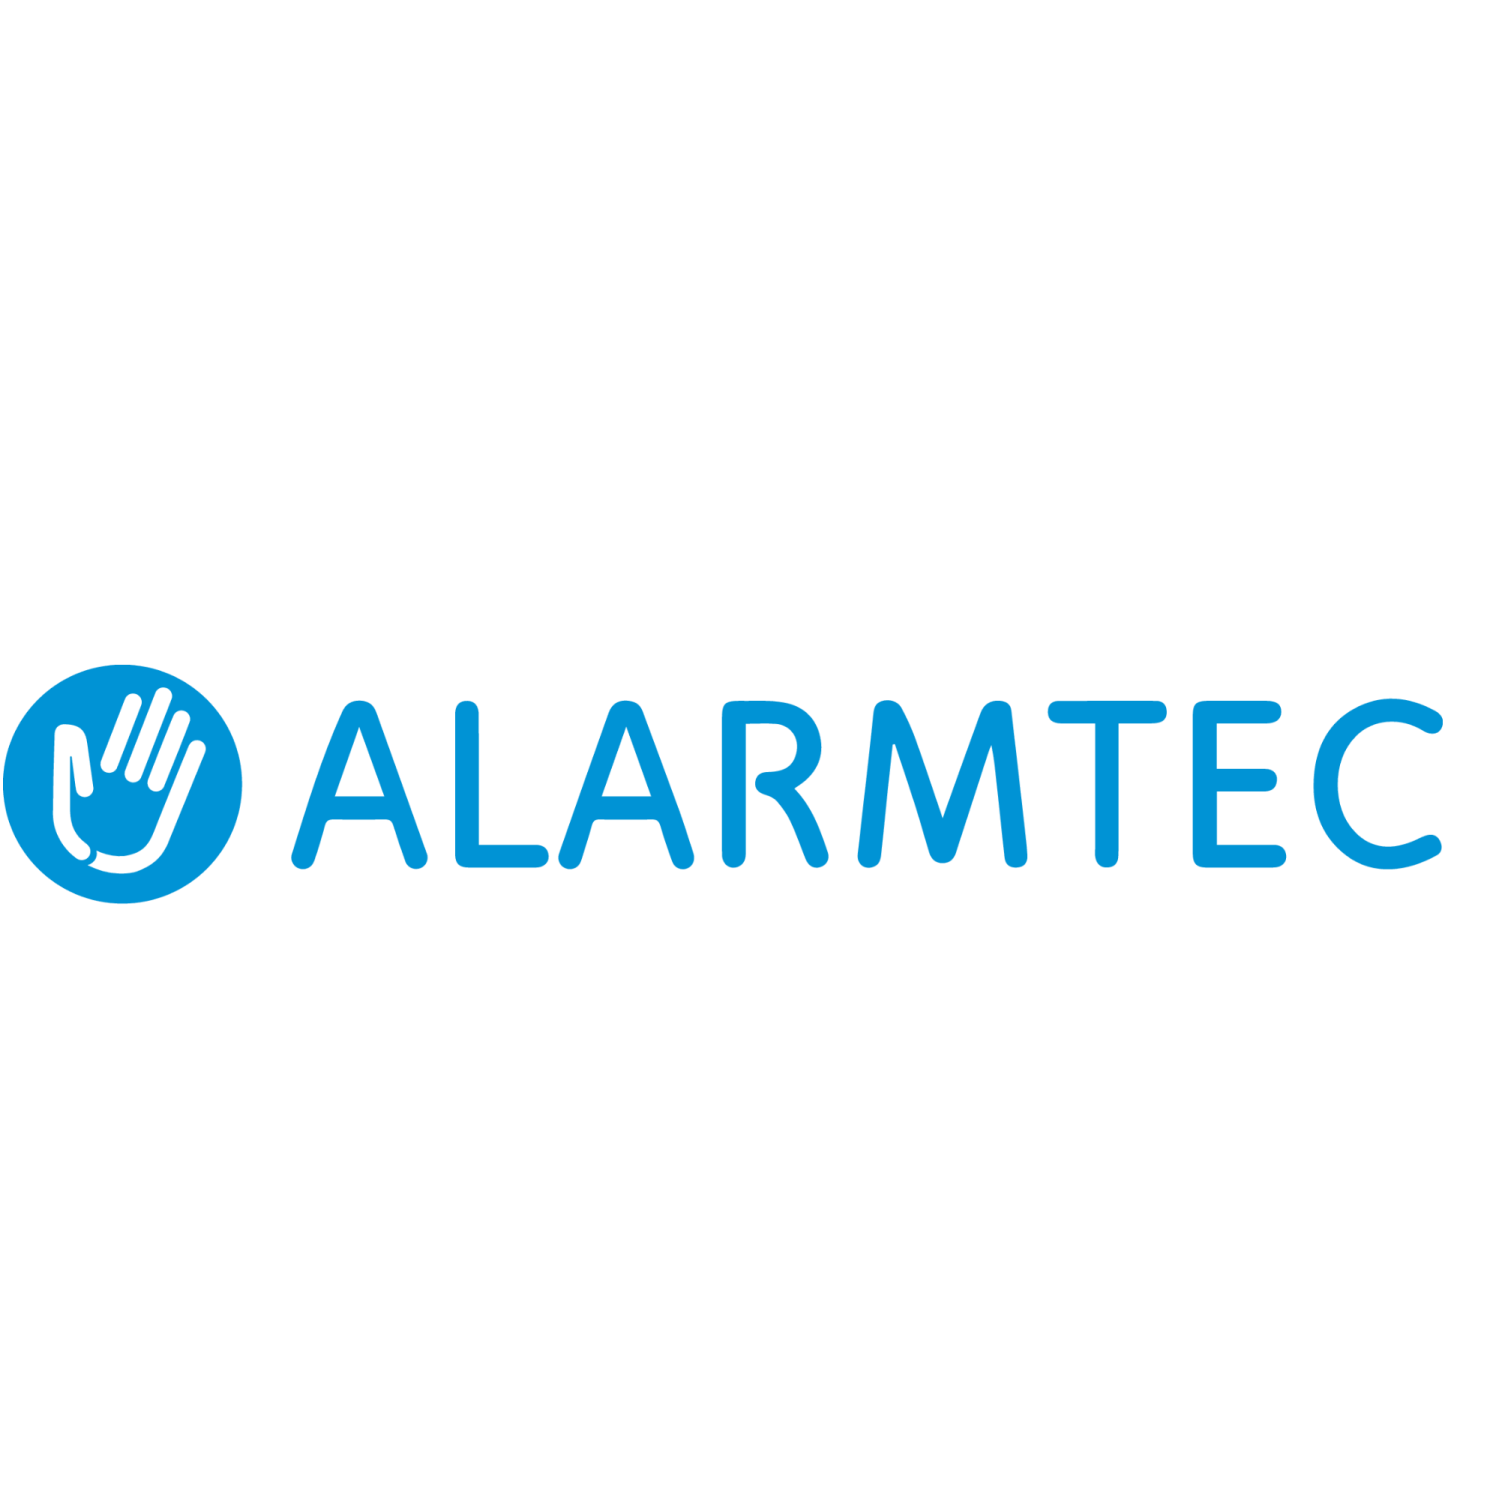 ALARMTEC AS - Wholesale of electronic and telecommunications equipment and parts in Tallinn